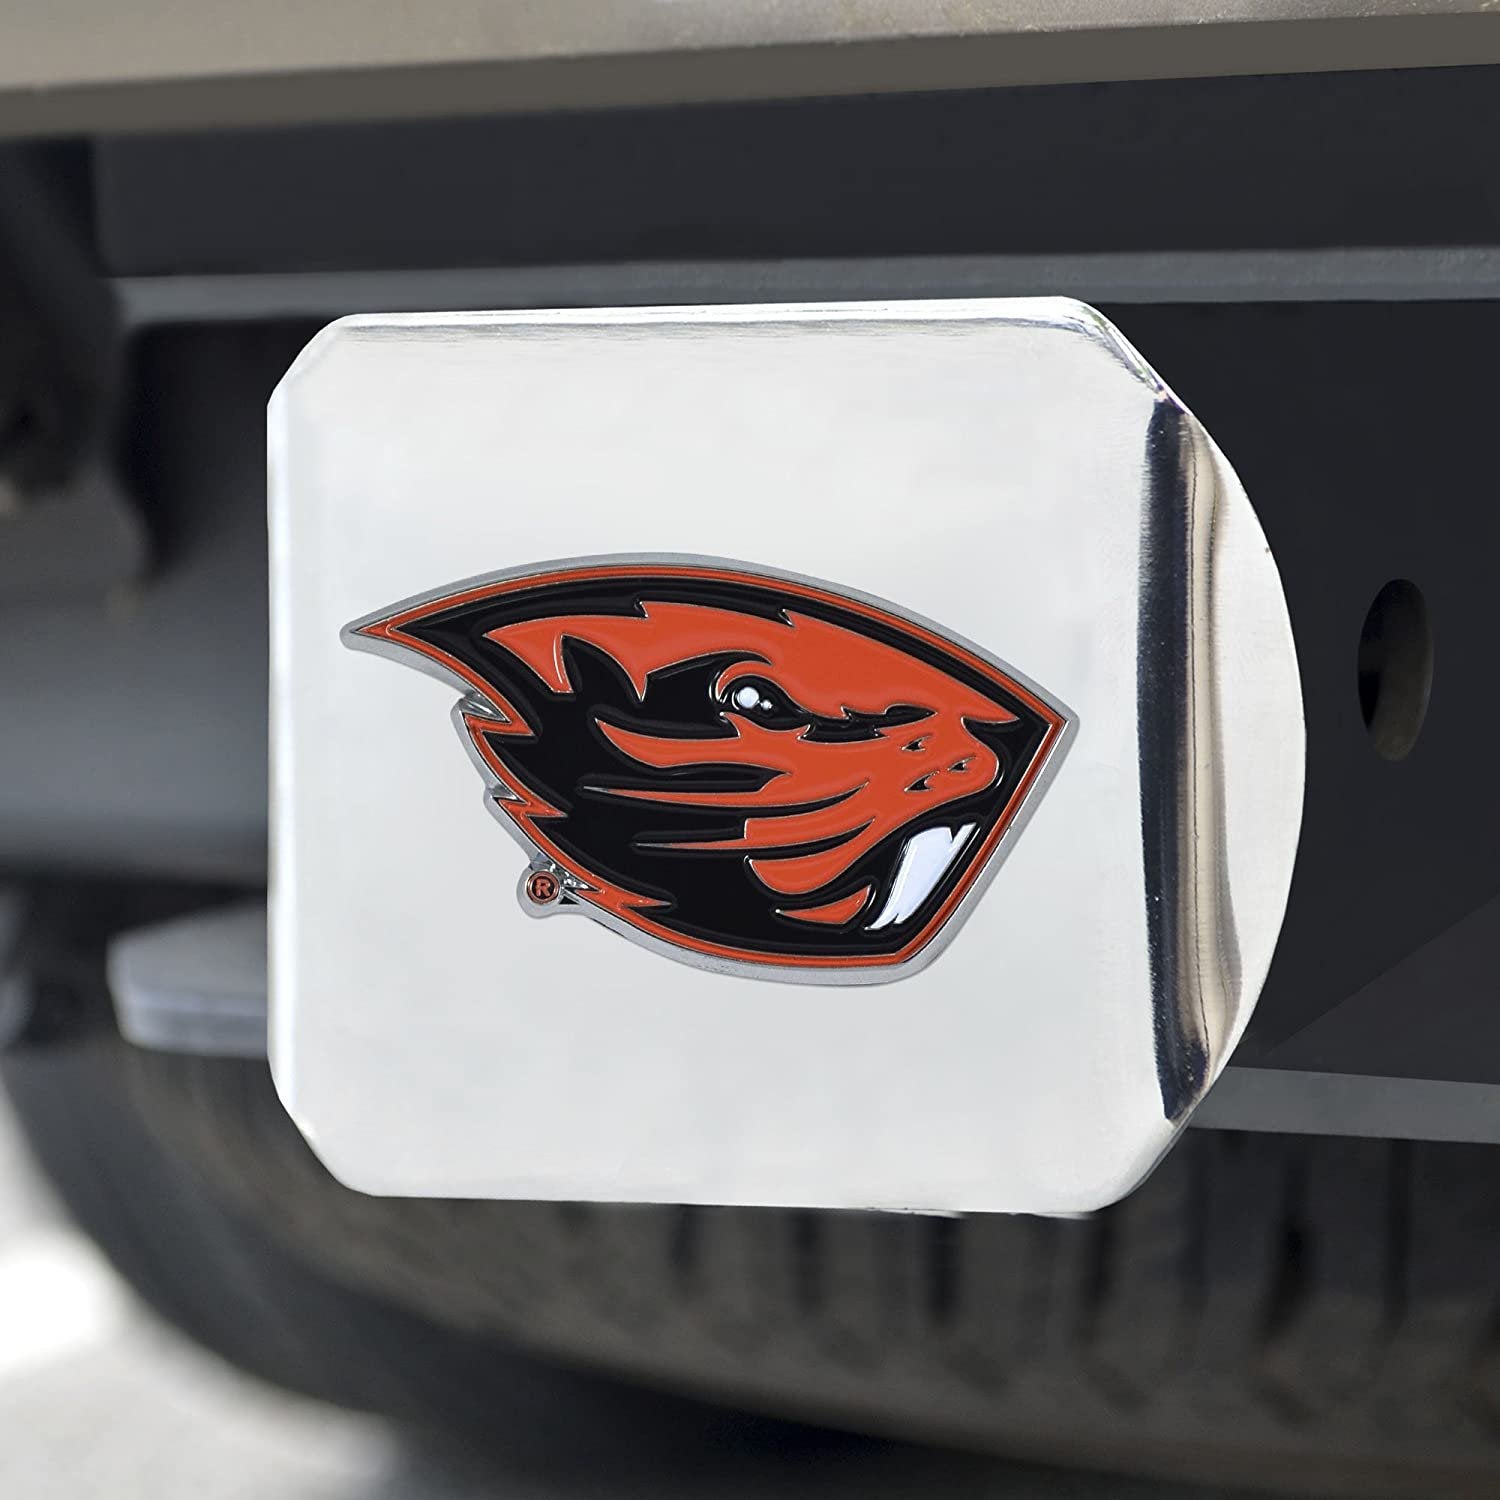 Oregon State Beavers Hitch Cover Solid Metal with Raised Color Metal Emblem 2" Square Type III University